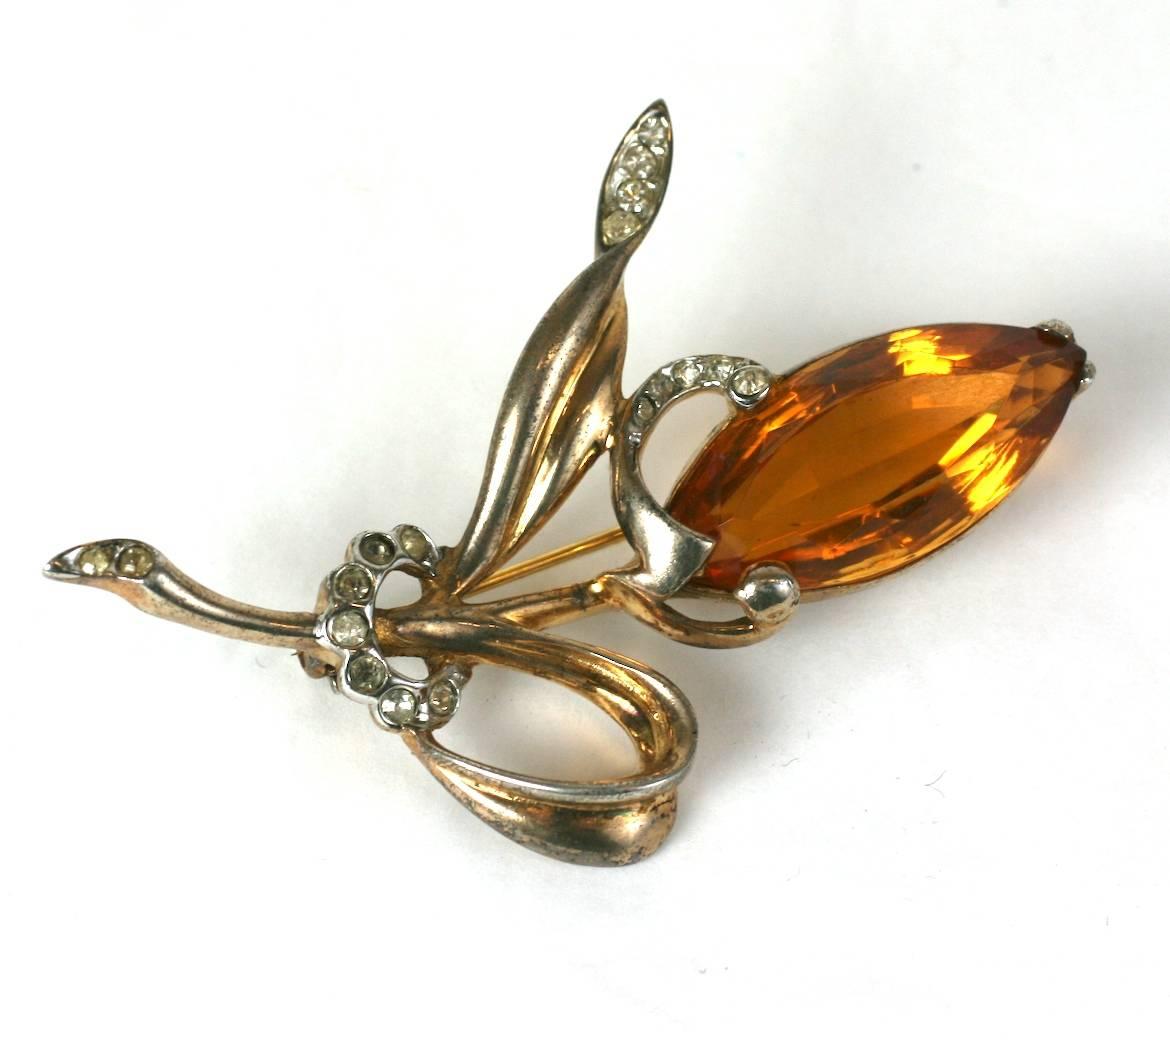 Charming Retro Topaz Spray from the 1940's by Reja. Gilded silver is used extensively in this period for striking jewels set with large, impressive 